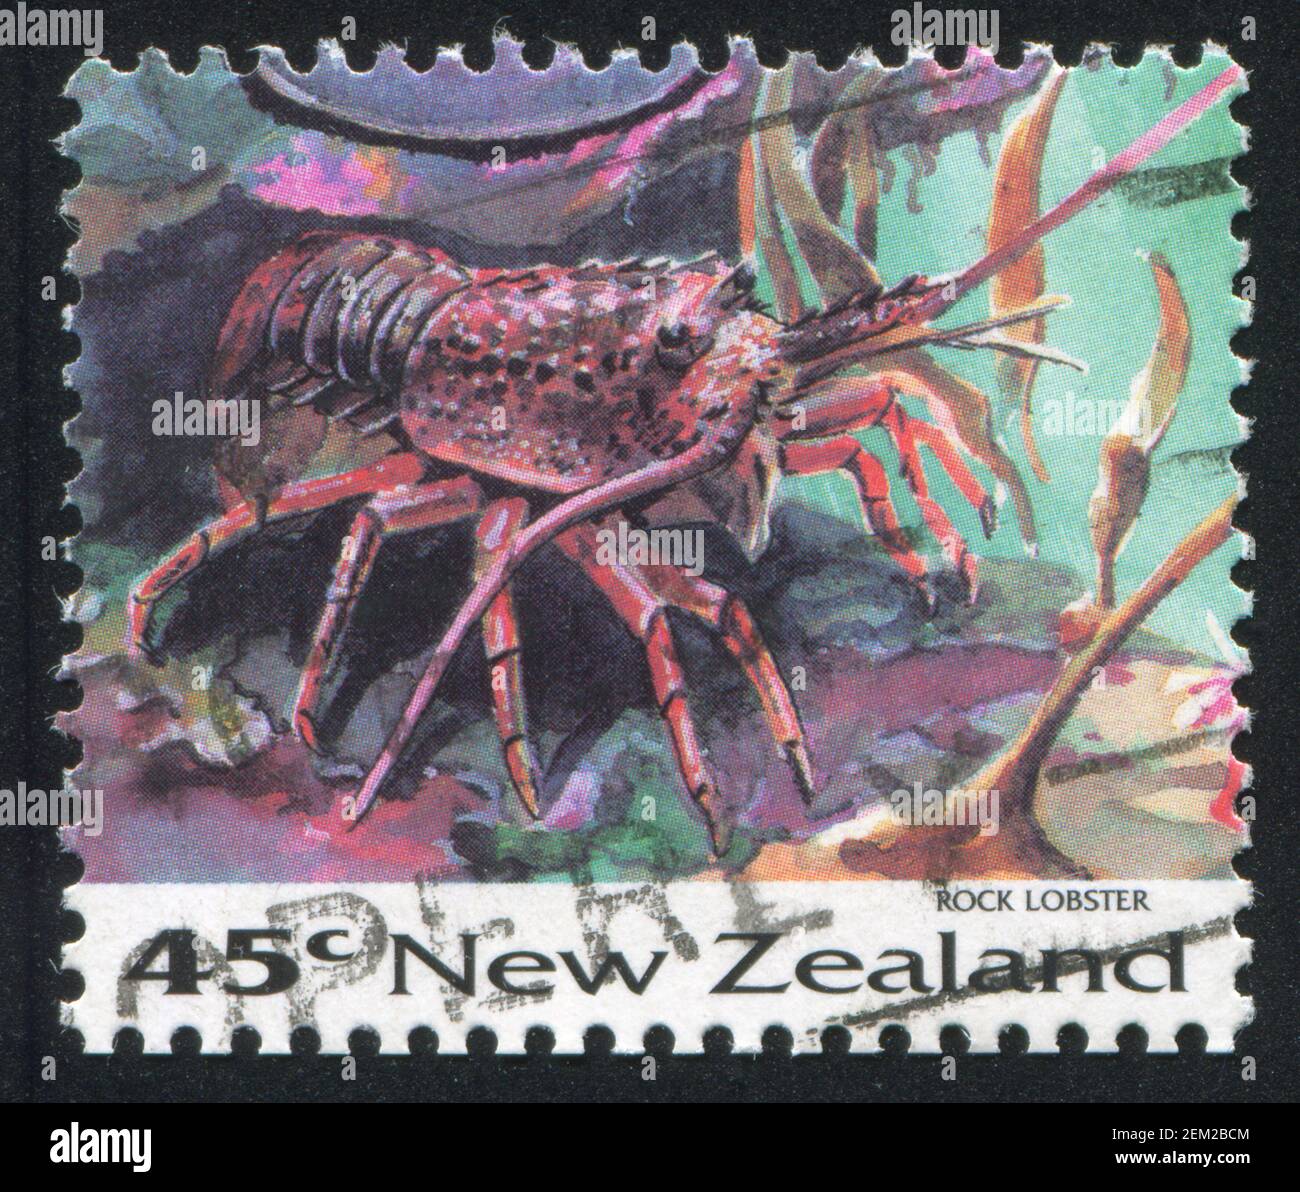 NEW ZEALAND - CIRCA 1993: stamp printed by New Zealand, shows Rock lobster, circa 1993 Stock Photo